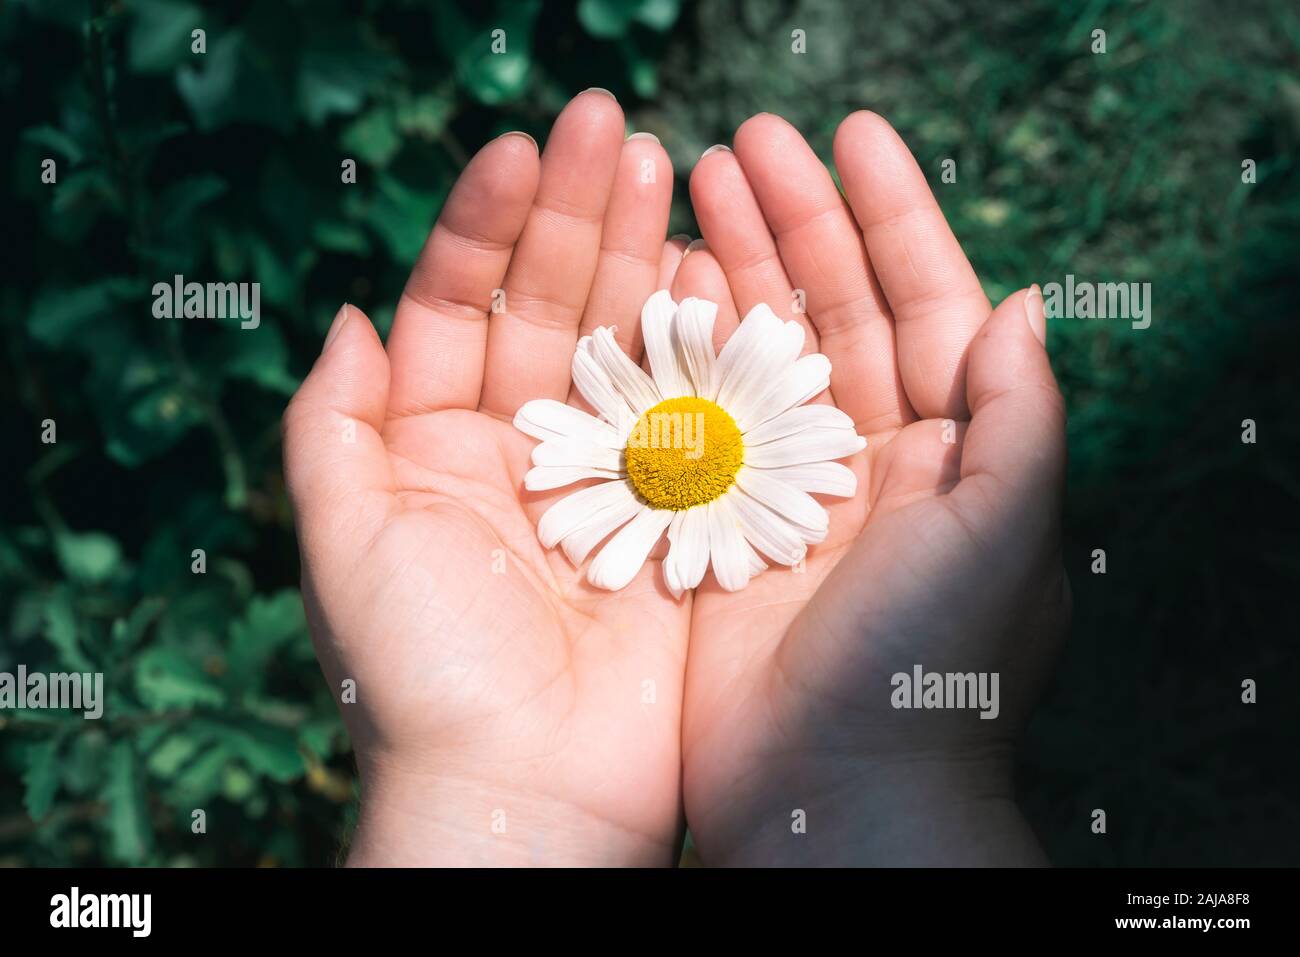 Big white daisy held in woman hands over aqua mint grass background, in sunlight. Protecting flower. Fragile nature context.Ornamental chamomile. Stock Photo